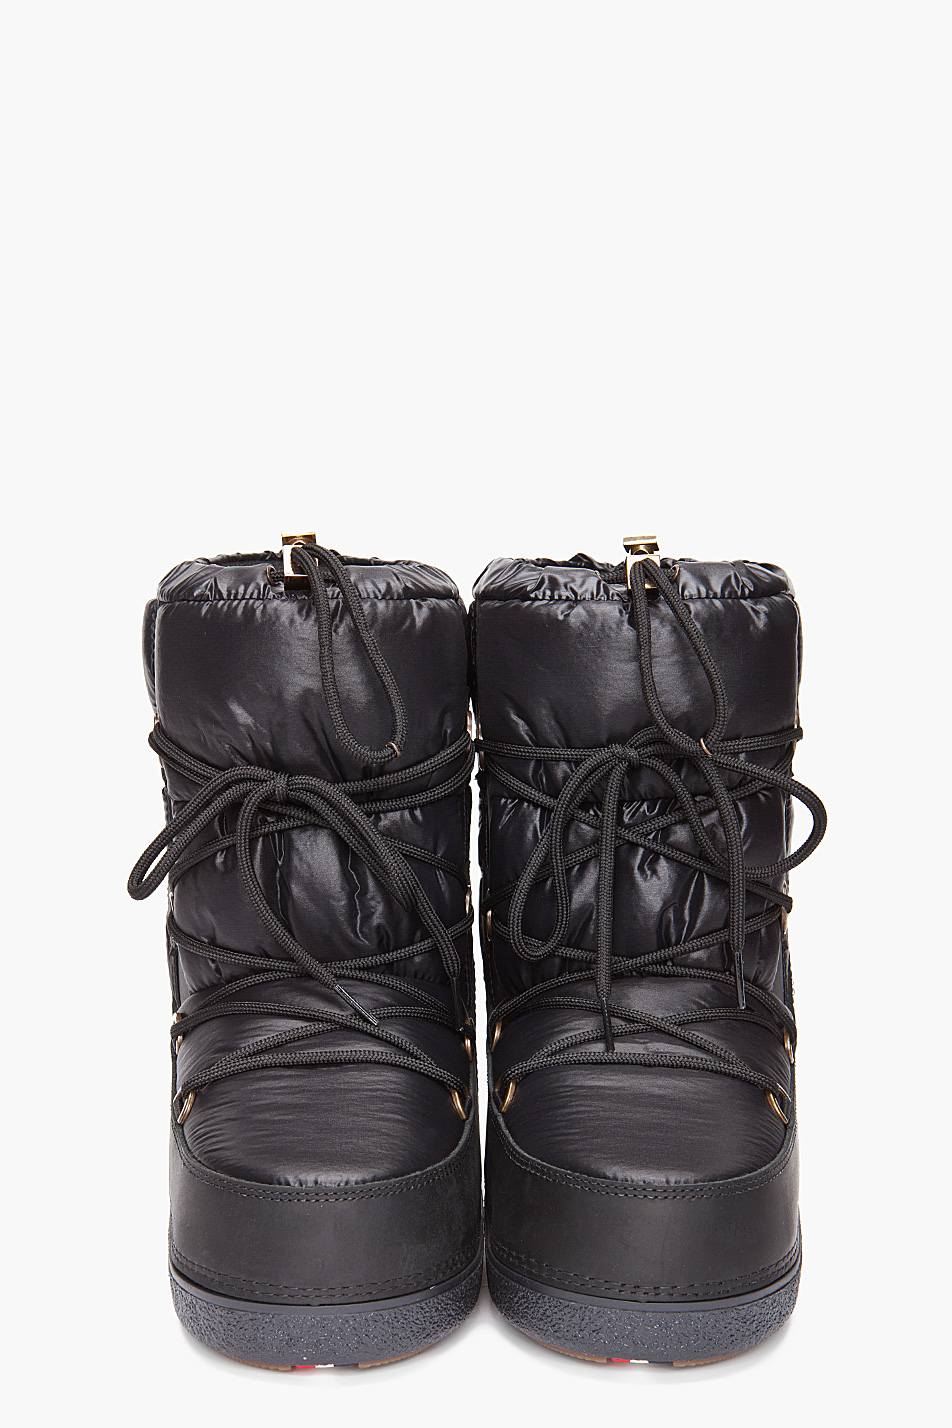 precocious a little disaster Moncler Moon Boots in Black for Men | Lyst